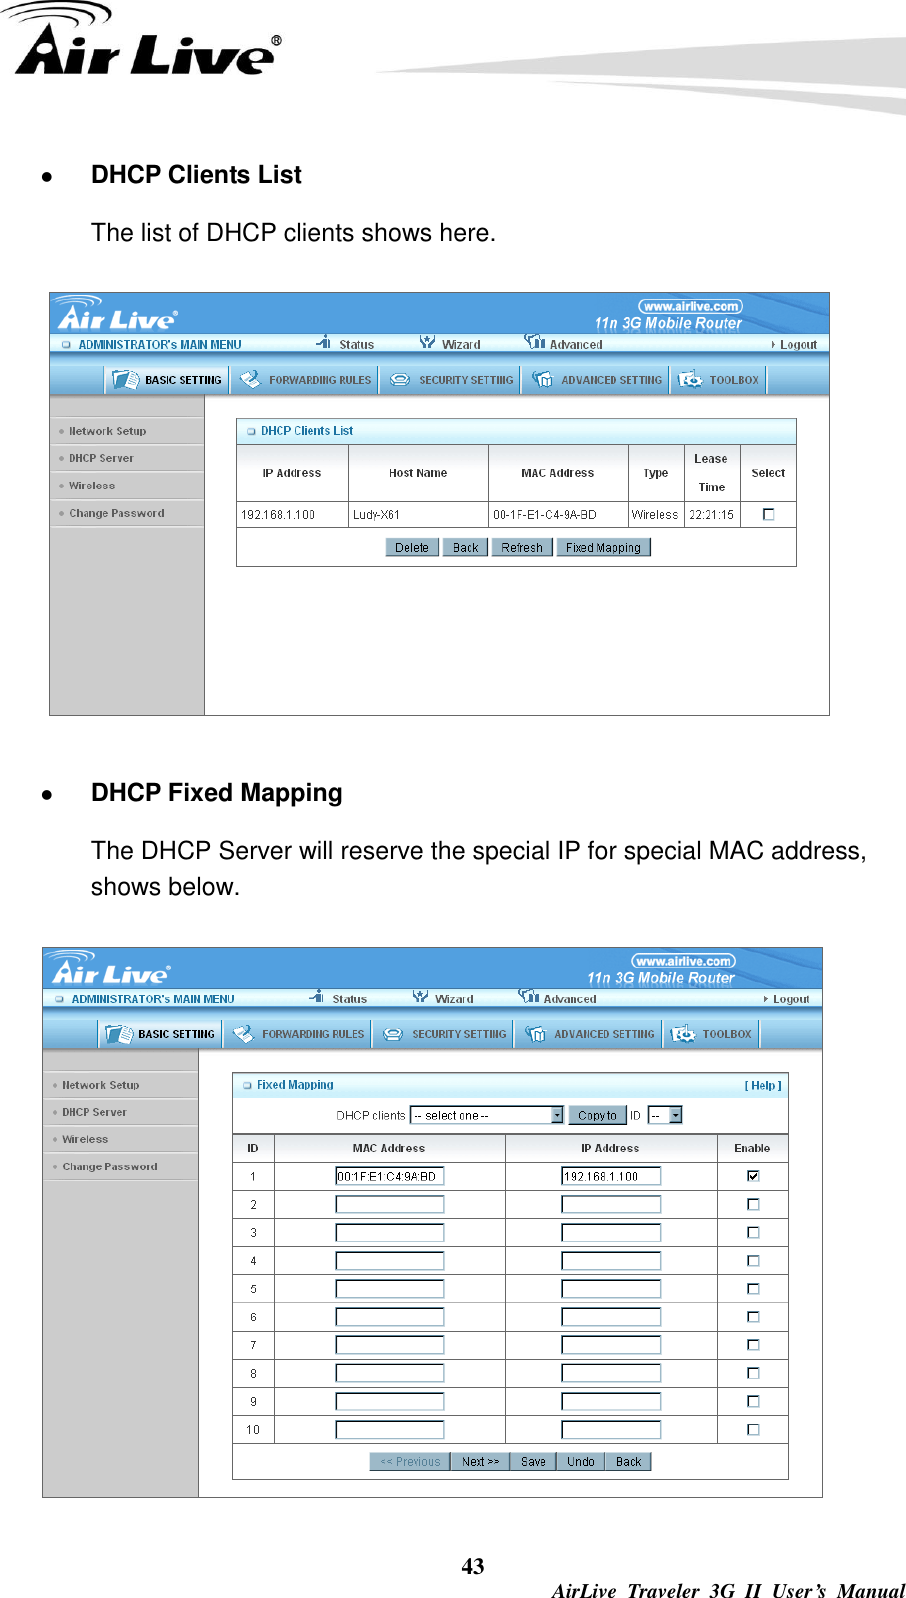  43  AirLive  Traveler  3G  II  User’s  Manual  DHCP Clients List The list of DHCP clients shows here.   DHCP Fixed Mapping The DHCP Server will reserve the special IP for special MAC address, shows below.  